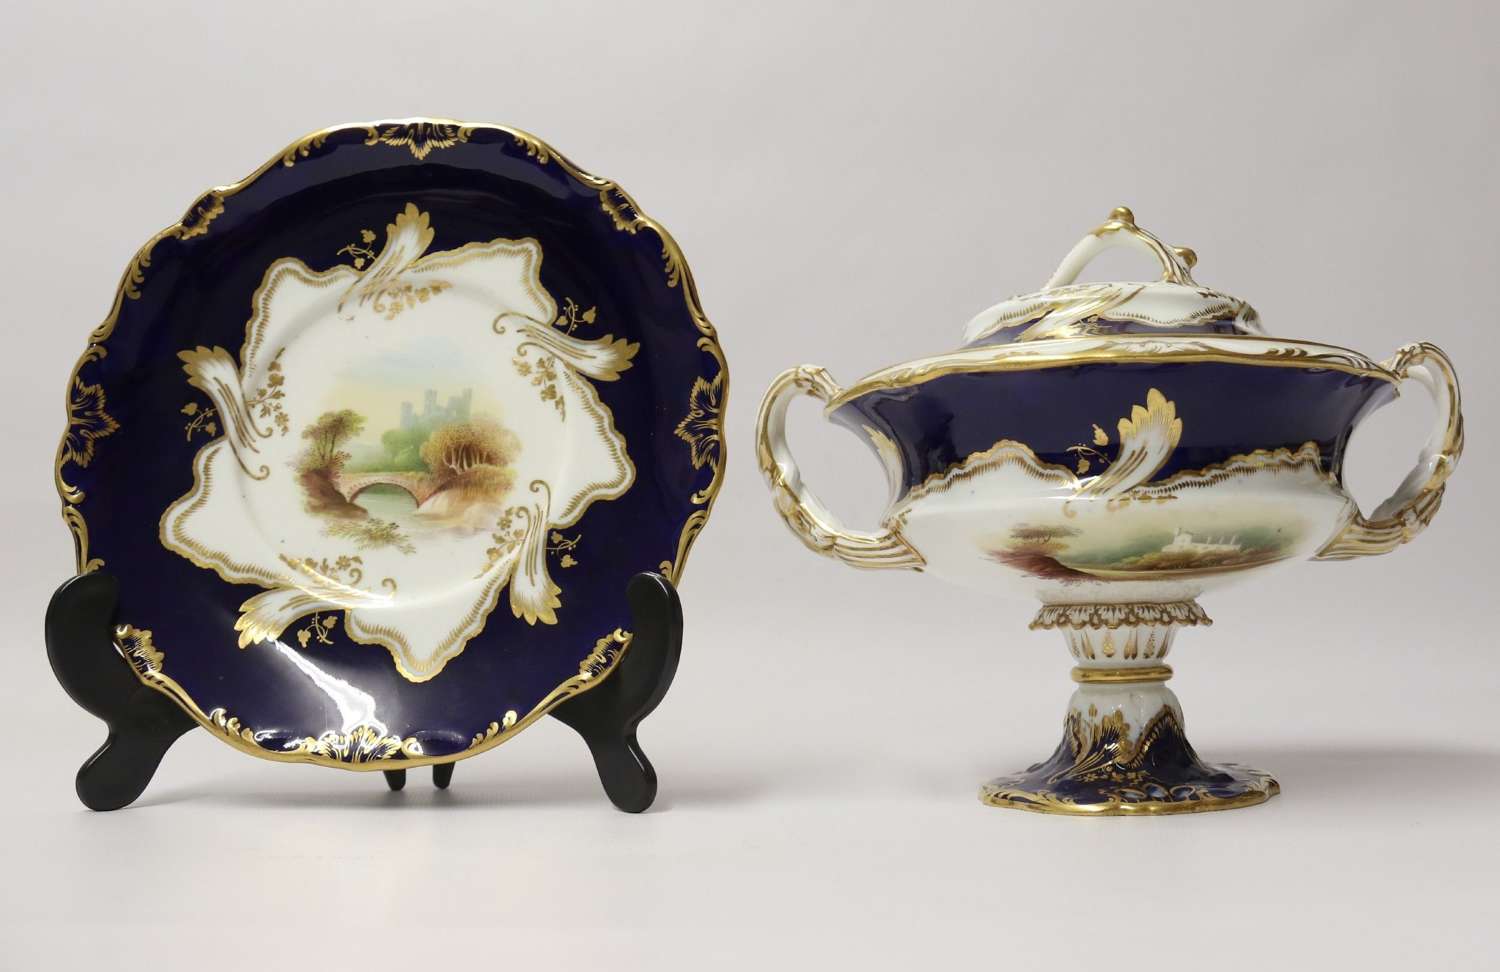 A Superb 19th C Mintons Dessert Cream Tureen With Stand.